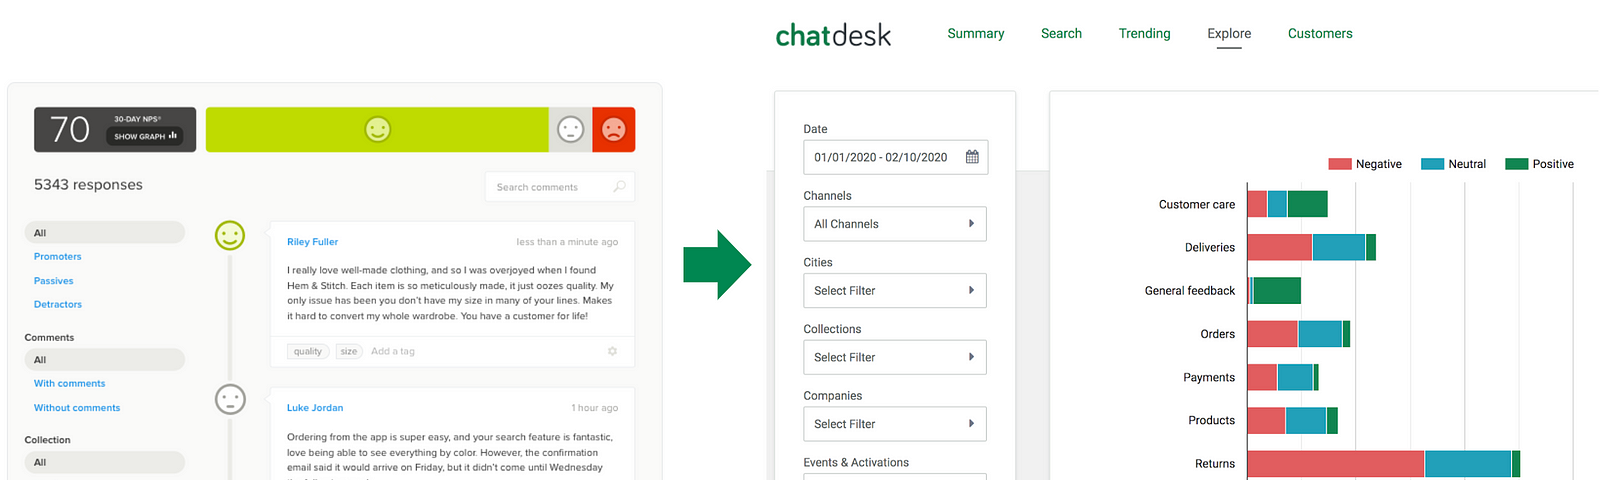 Customer feedback from Delighted surveys can be automatically analyzed in Chatdesk Trends